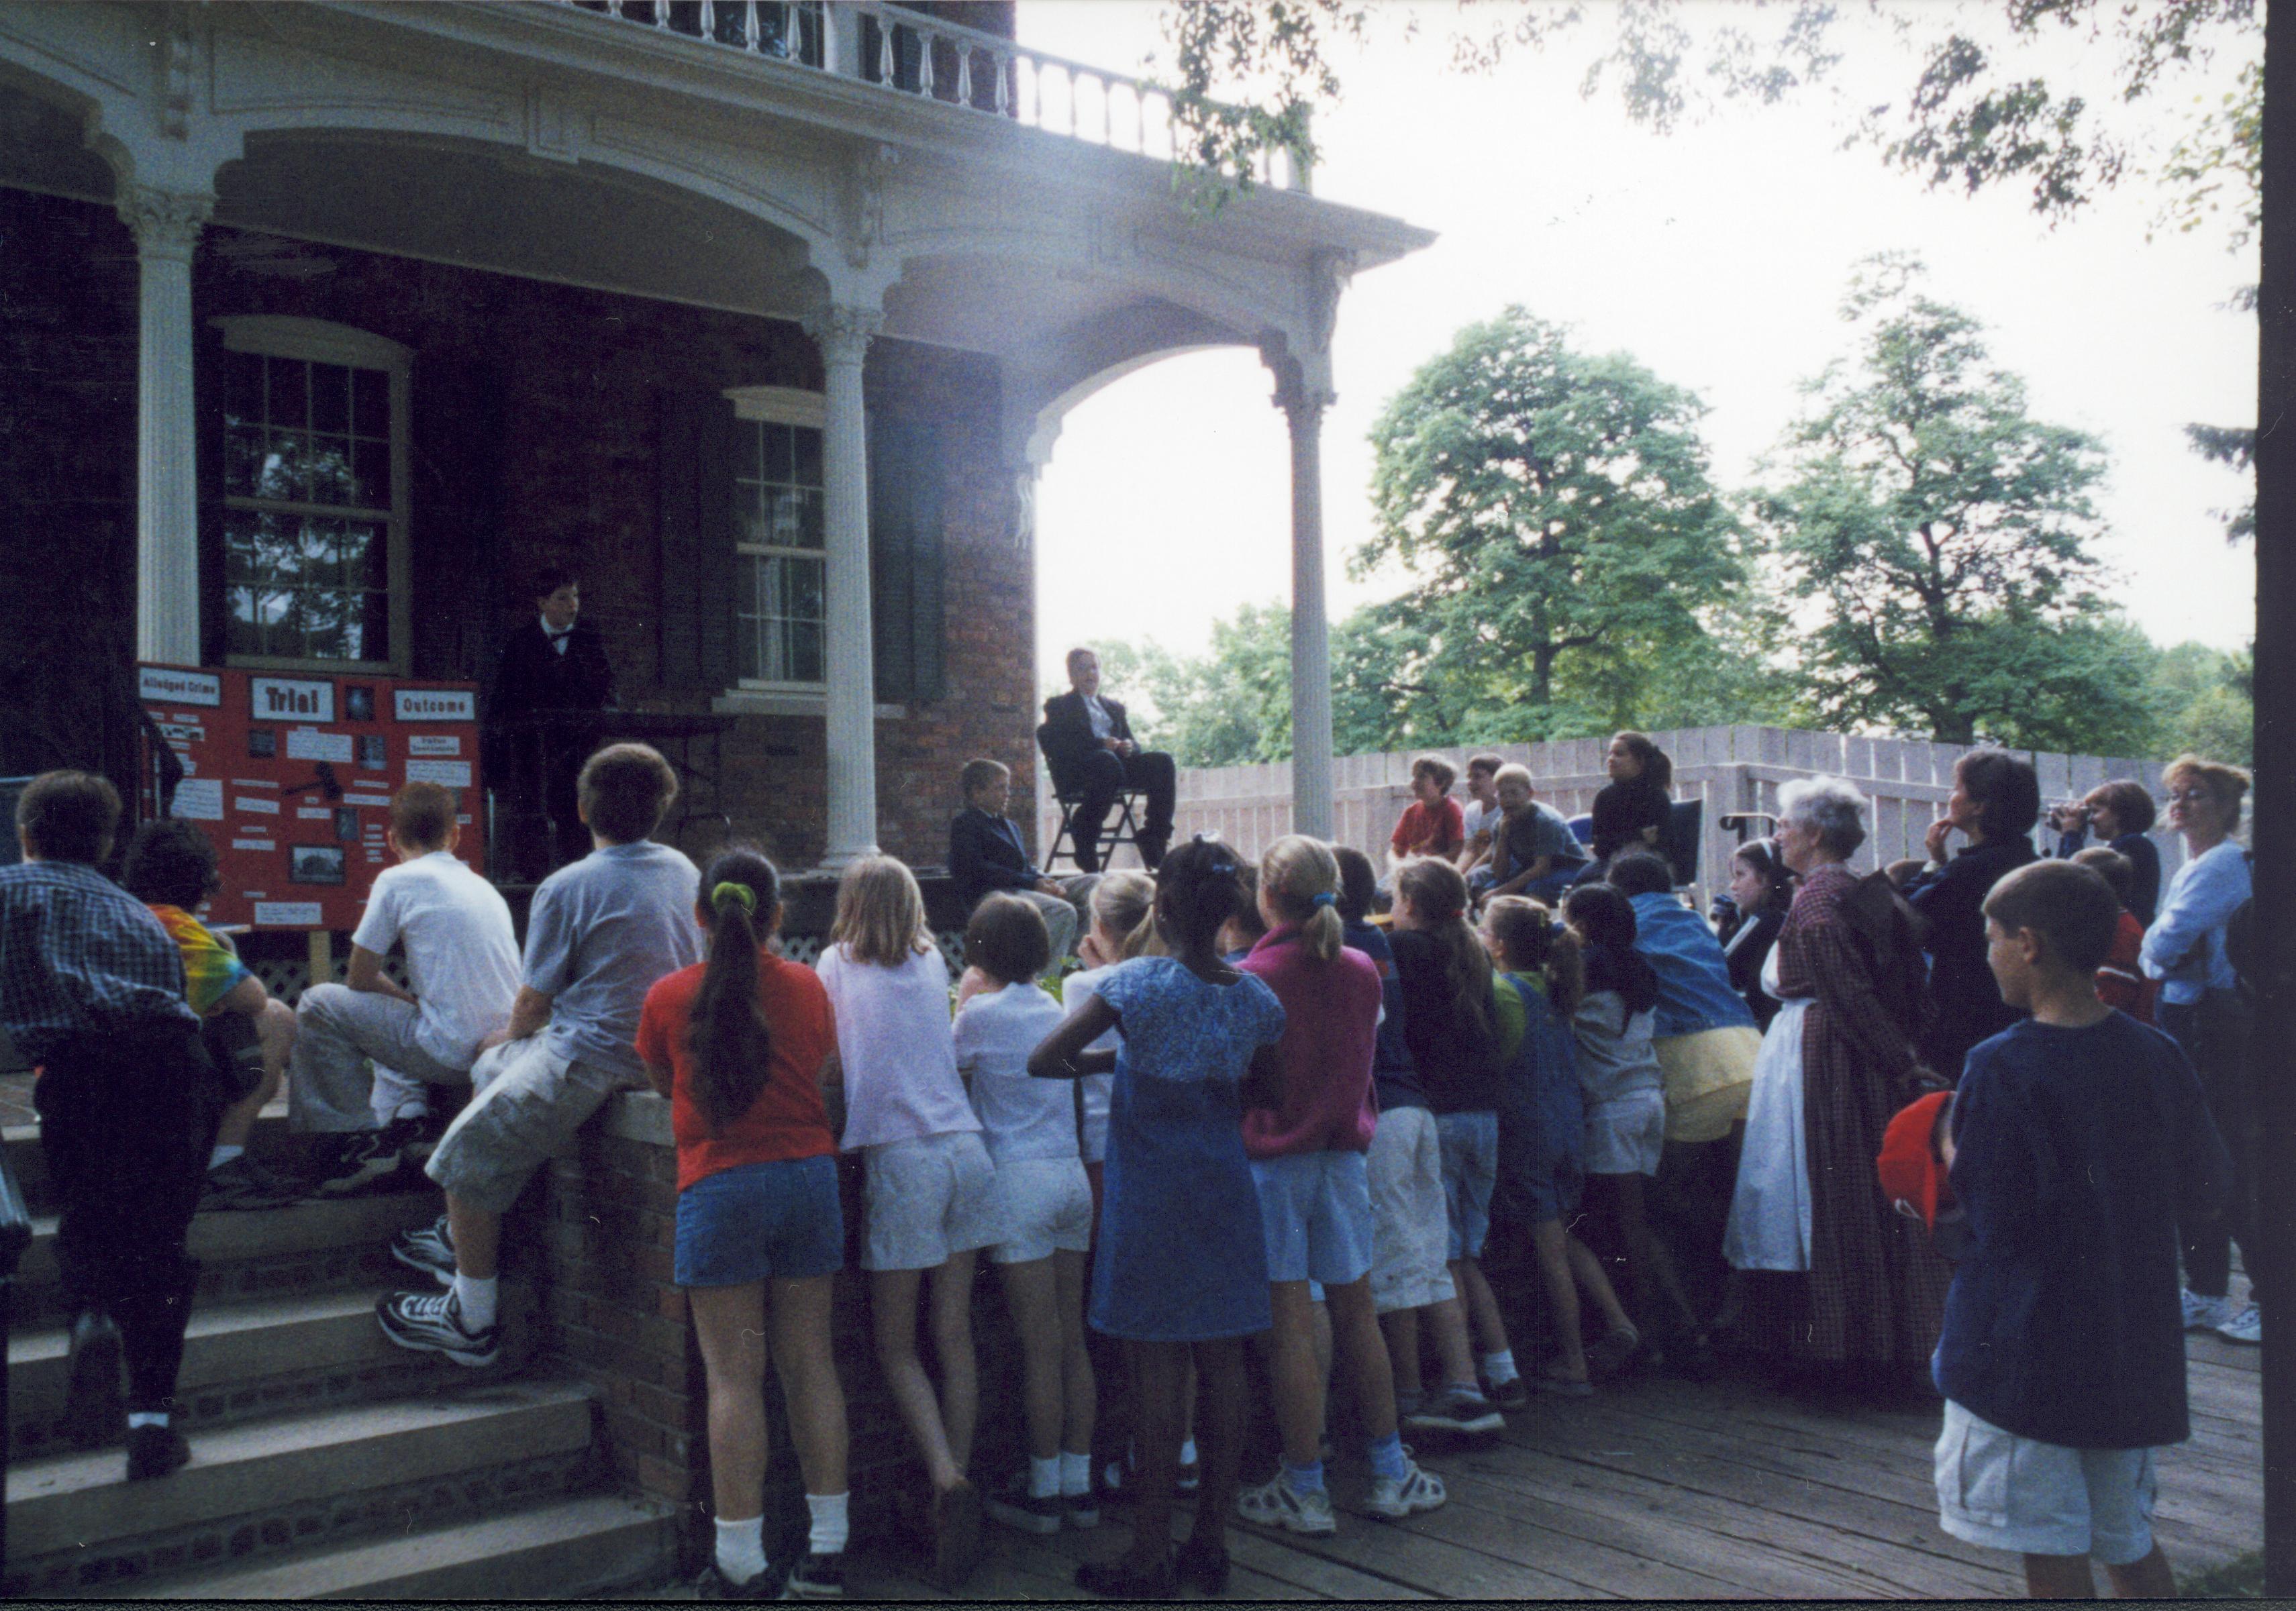 Iles School Living History program - Two boys on Conference Center porch perform a mock trial of one of Lincoln's cases. School groups watch from steps and boardwalk. Mentor in period clothing on right also watches performance. Looking Southeast from 8th Street Iles School, living history, Lincoln Legal Career, students, school groups, Conference Center